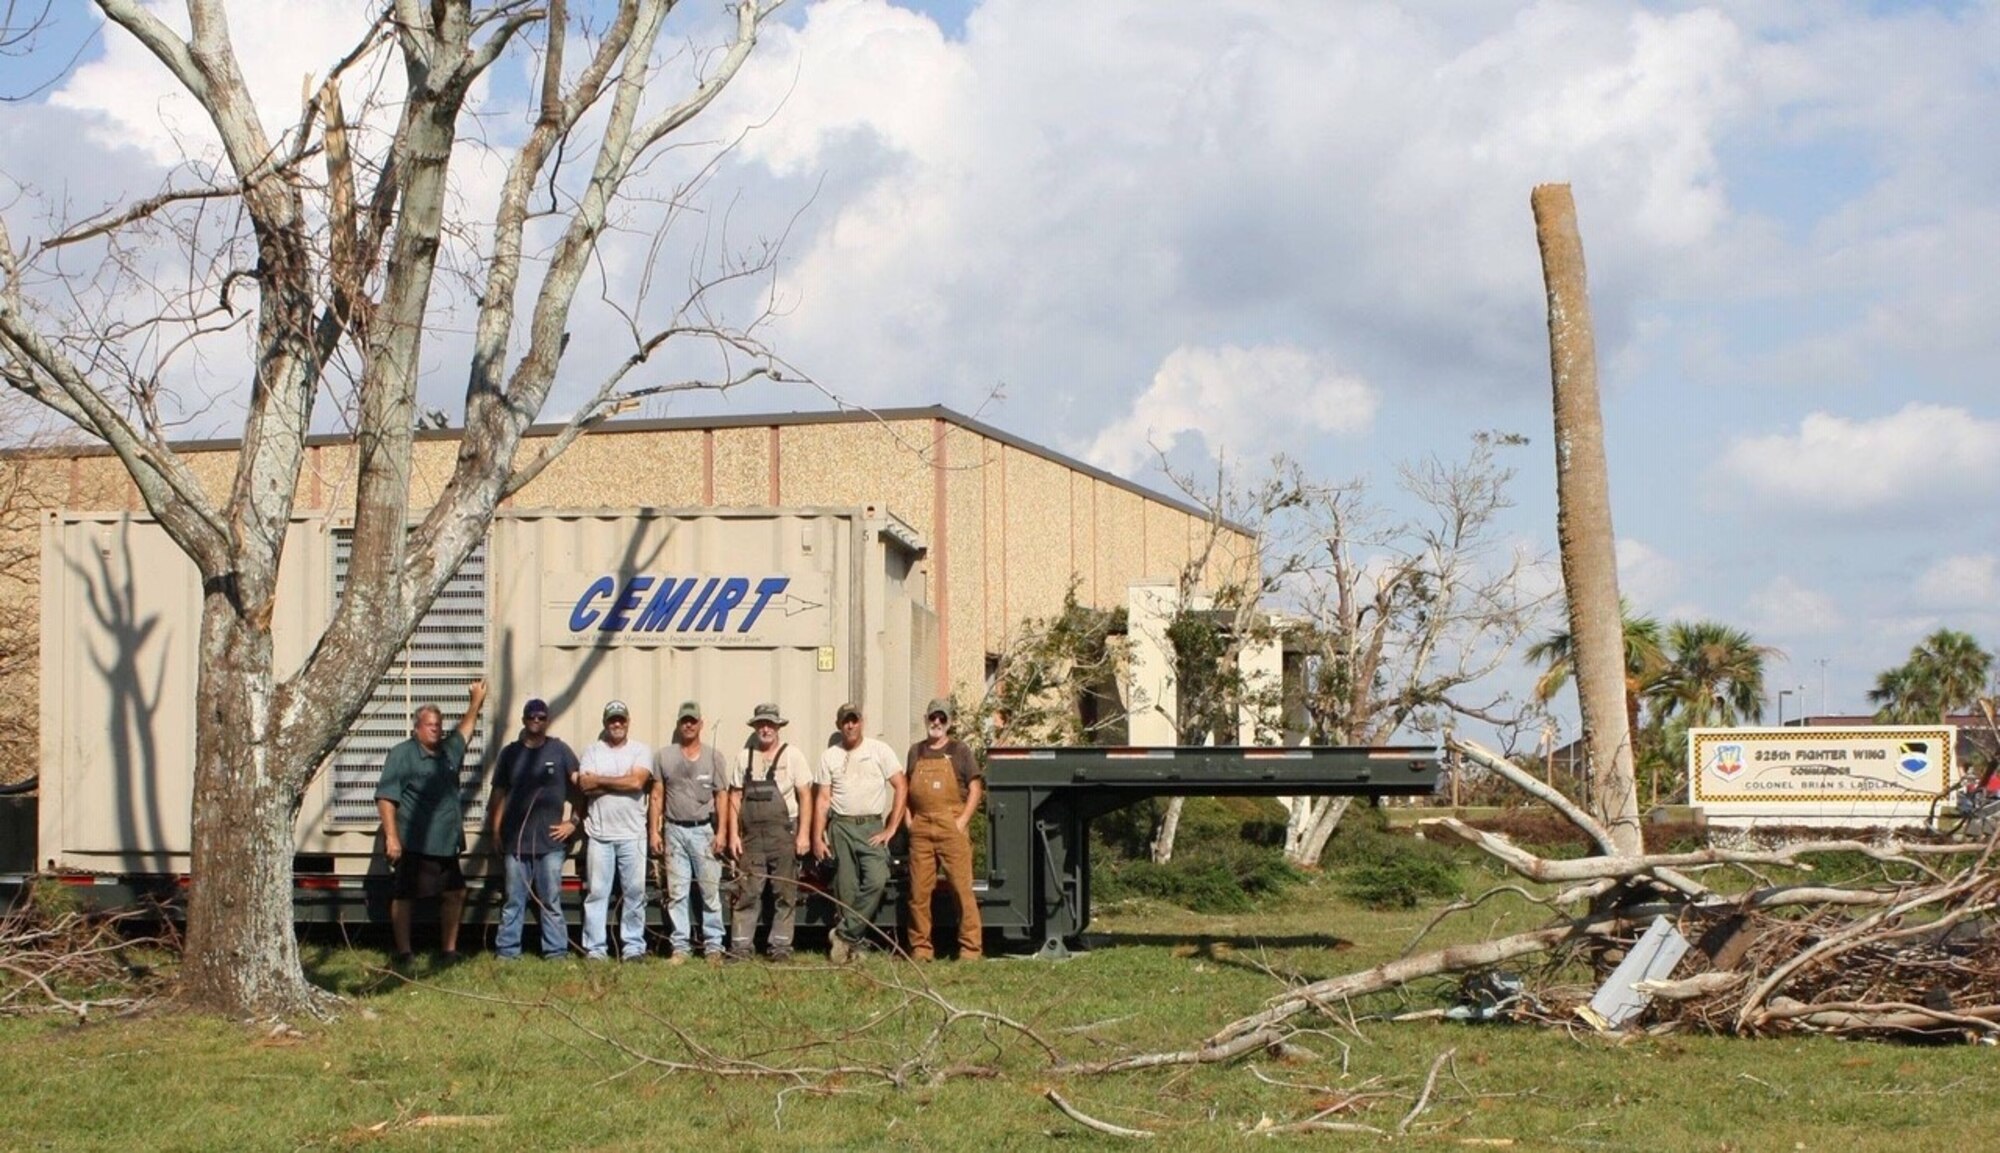 Members of CEMIRT, seen here in front of the 325th Fighter Wing building at Tyndall AFB, hooked up 17 generators for a total of 3.4 megawatts of power in the first nine days post-Hurricane Michael.